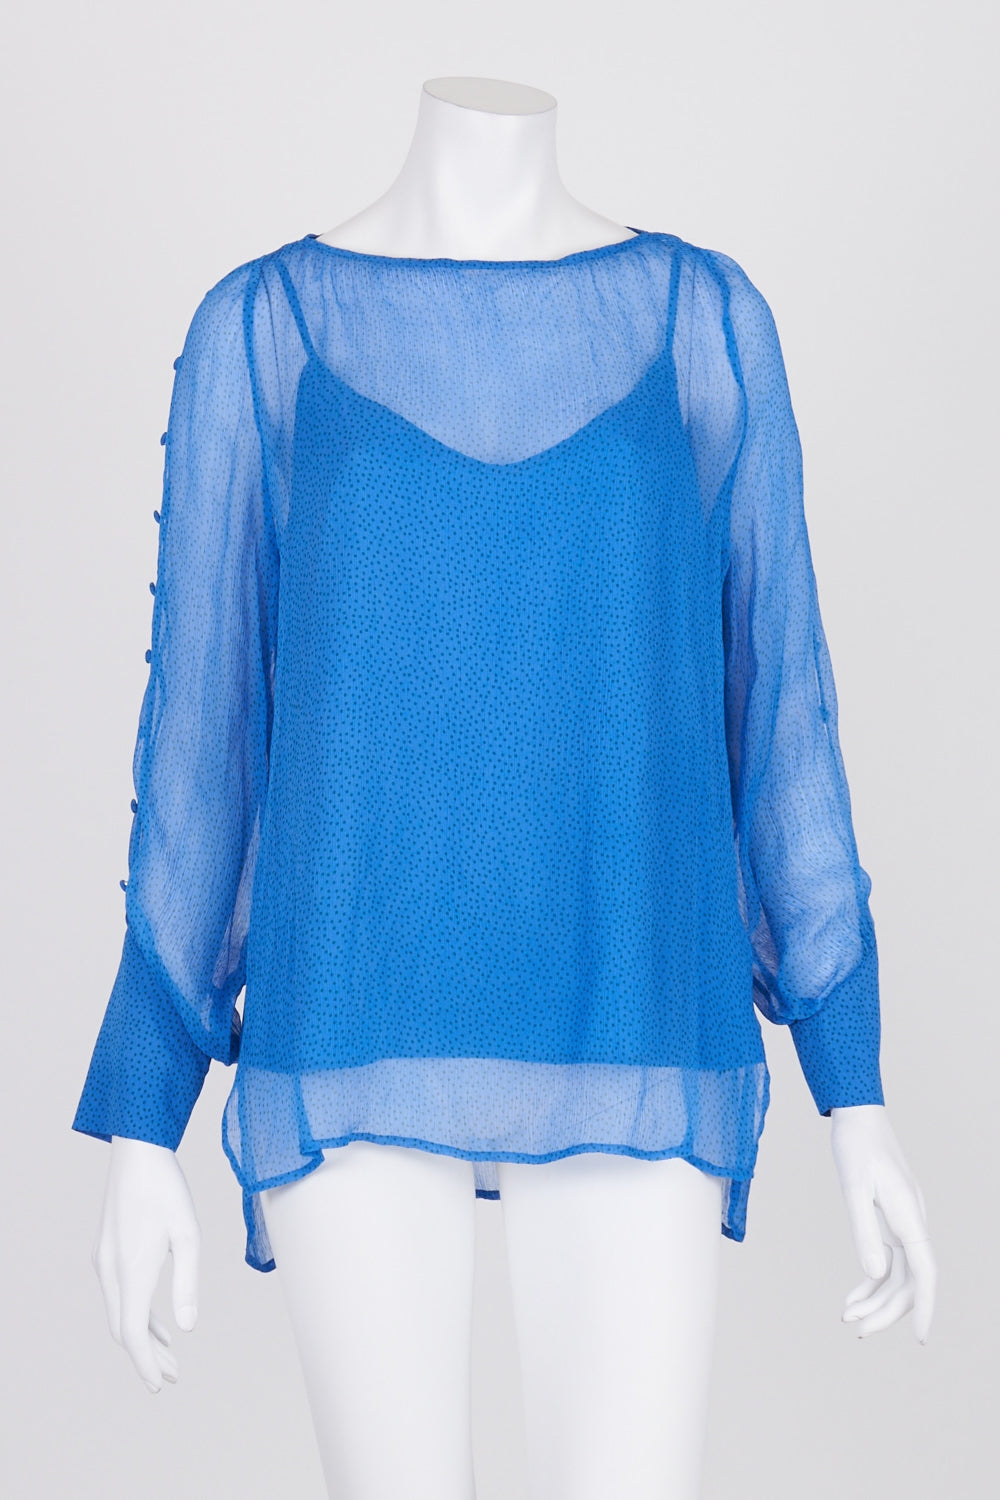 Cable Melbourne Blue Patterned Sheer Top M